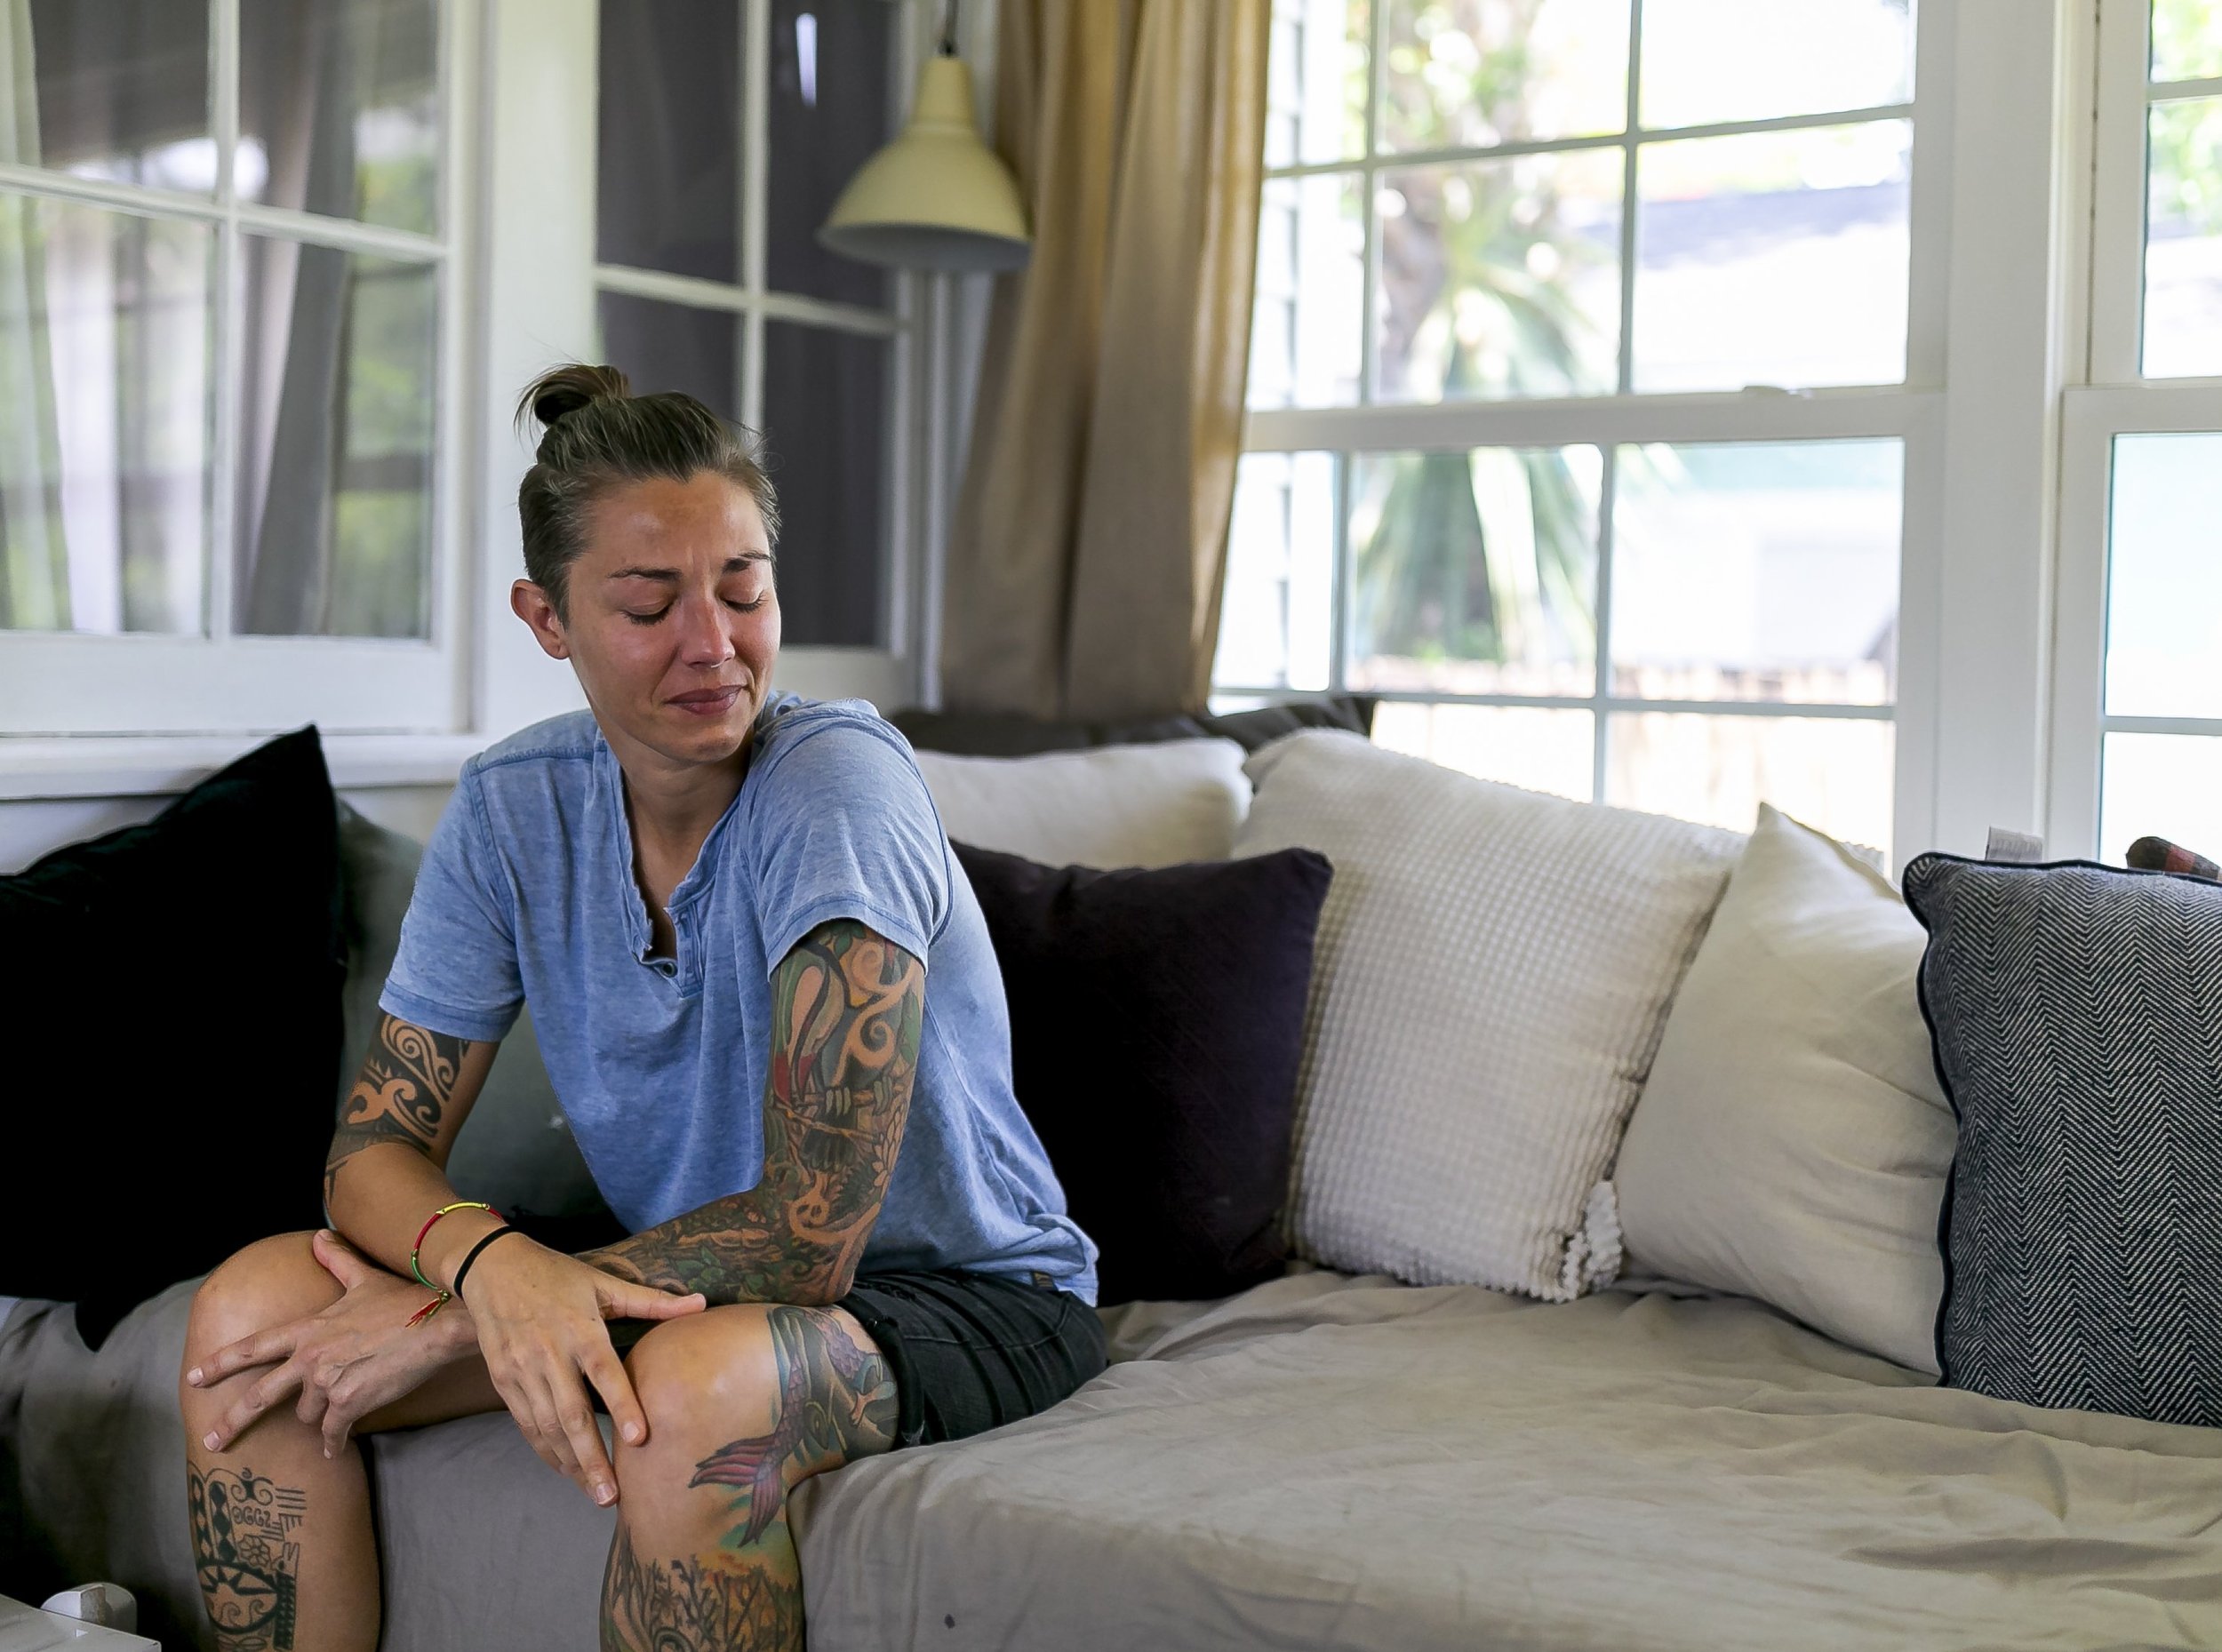  Broward Sheriff’s Office Battalion Chief Nichole Notte, 41, is photographed at her home on Tuesday, June 21, 2022 in Fort Lauderdale, Fla. Notte, who was a first responder during the Champlain Towers South condo collapse in Surfside, has been dealin